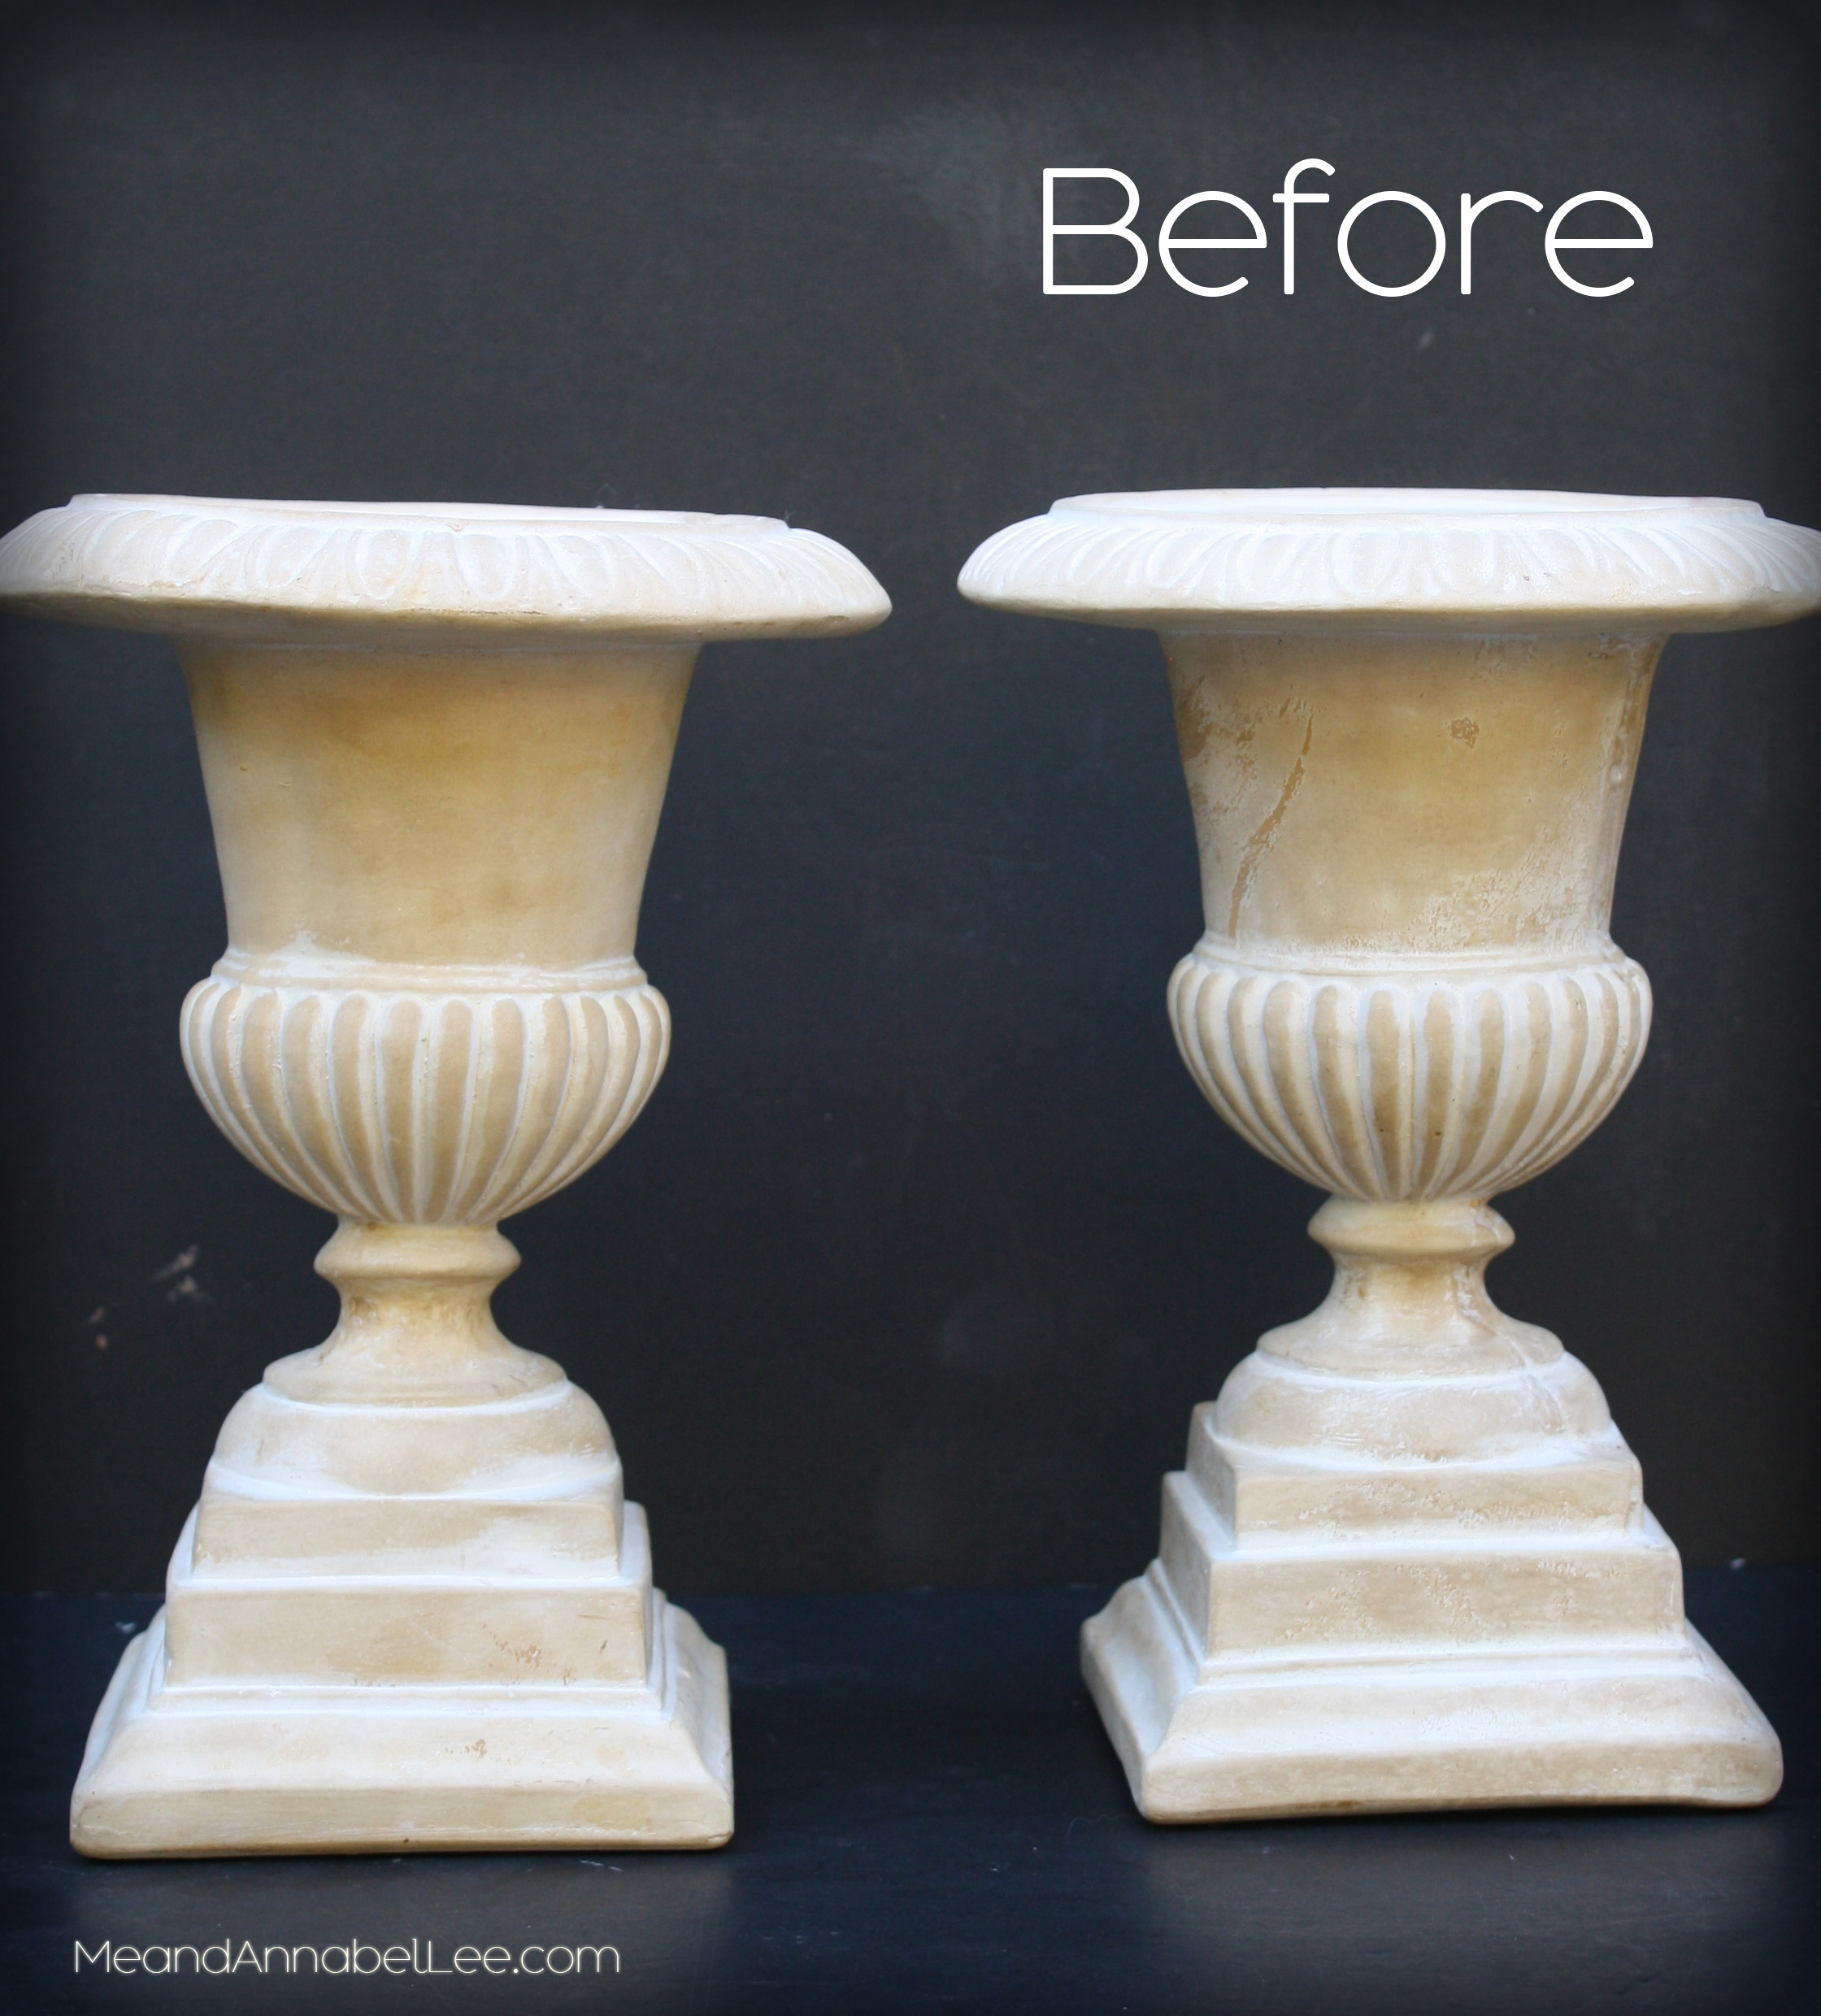 Before and After Thrift Store Urn Project | www.MeandAnnabelLee.com